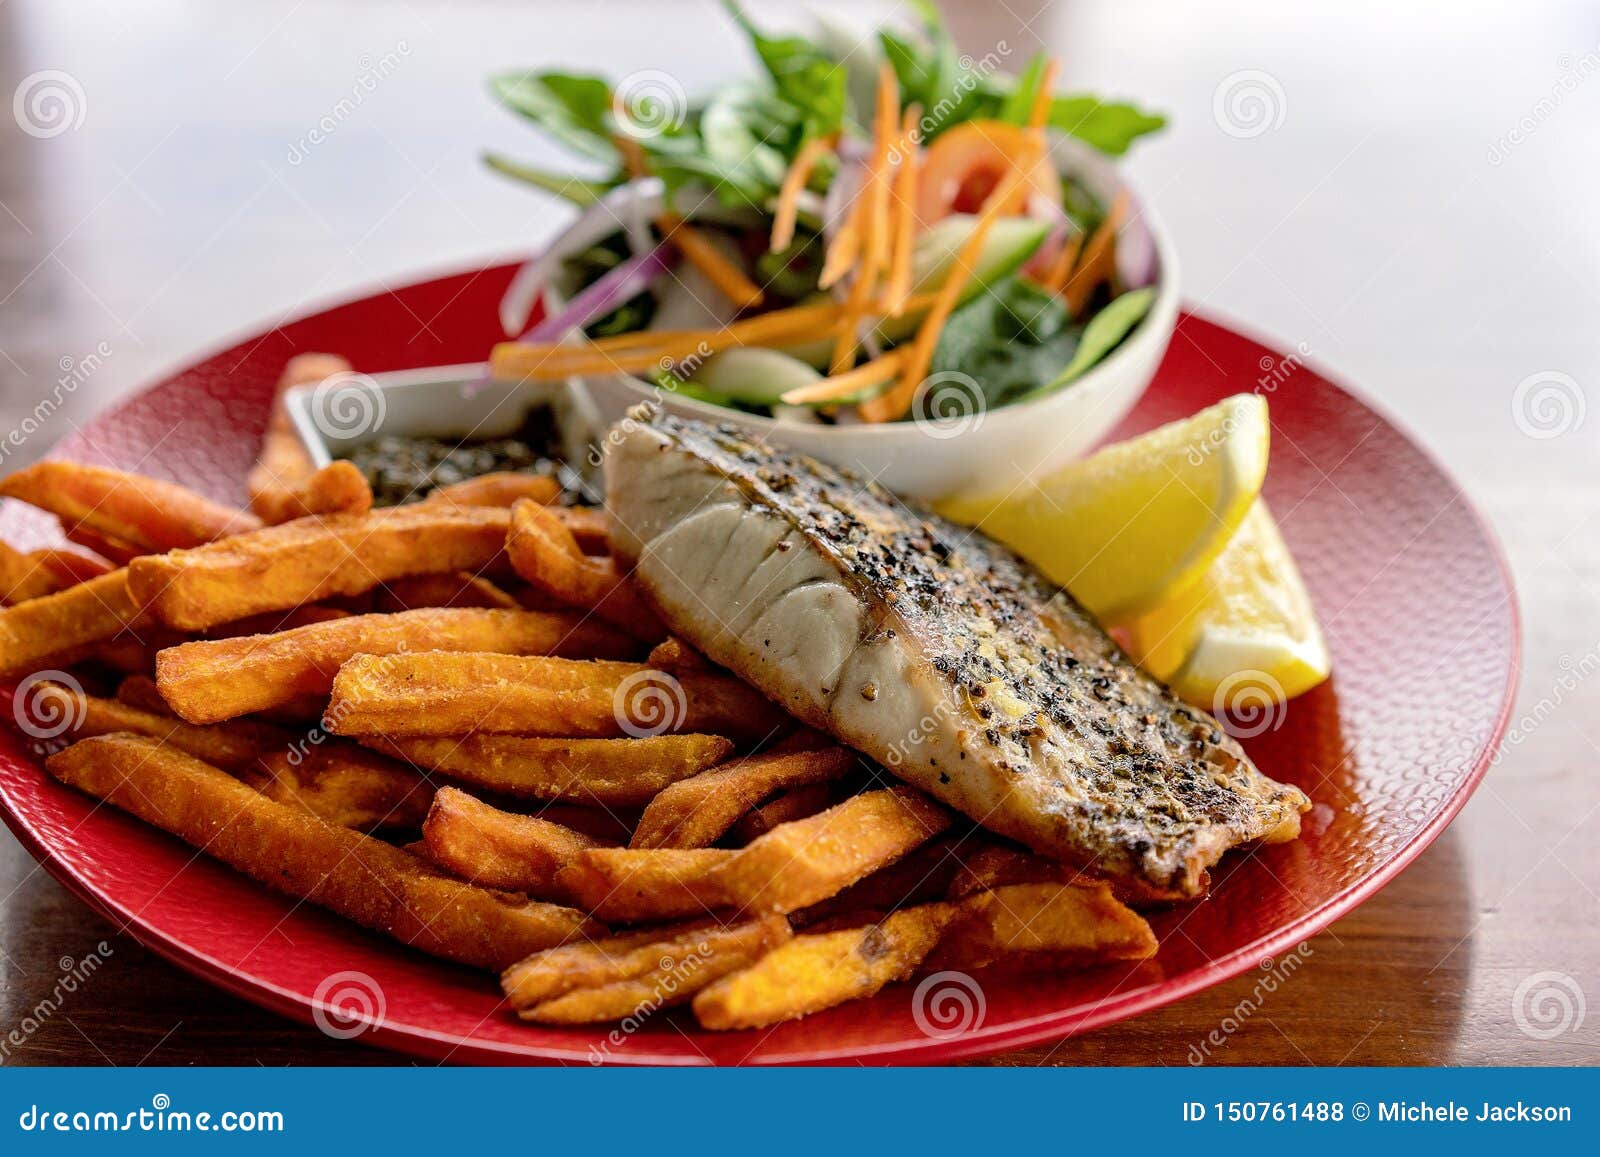 Australian Pub Fish and Chips Meal Stock Photo - of hungry, aussie: 150761488